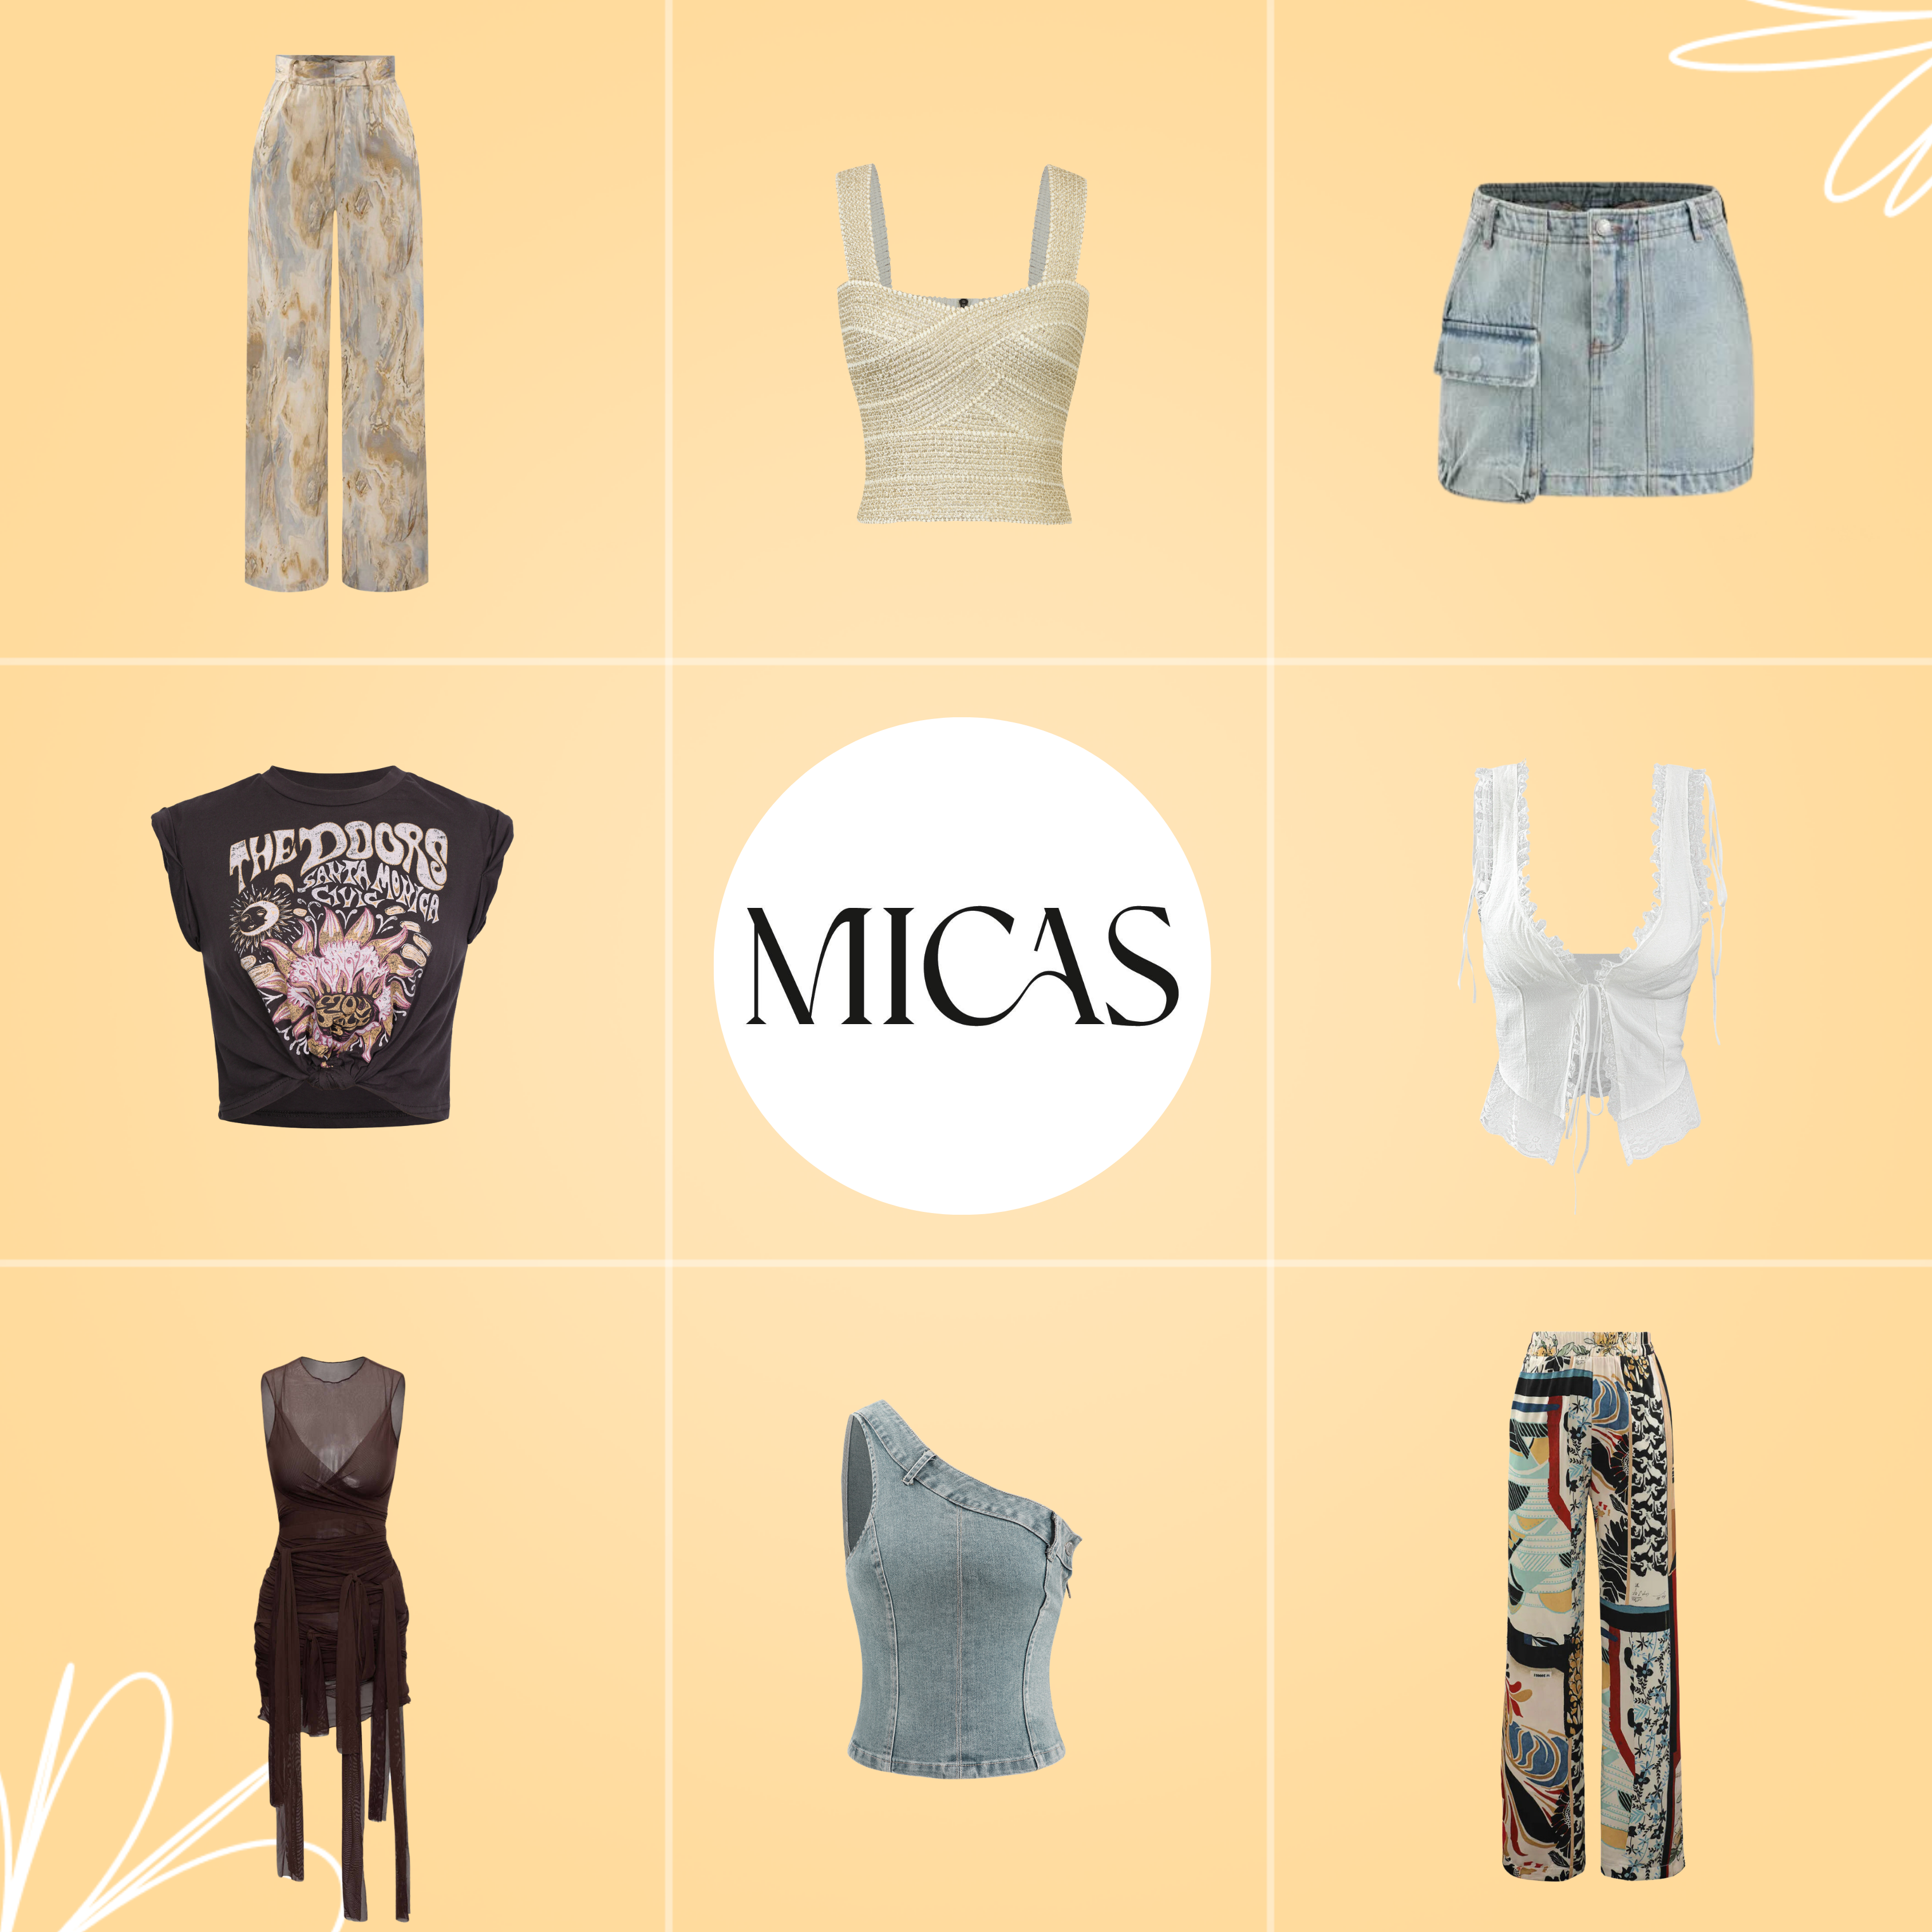 Brand image for Micas